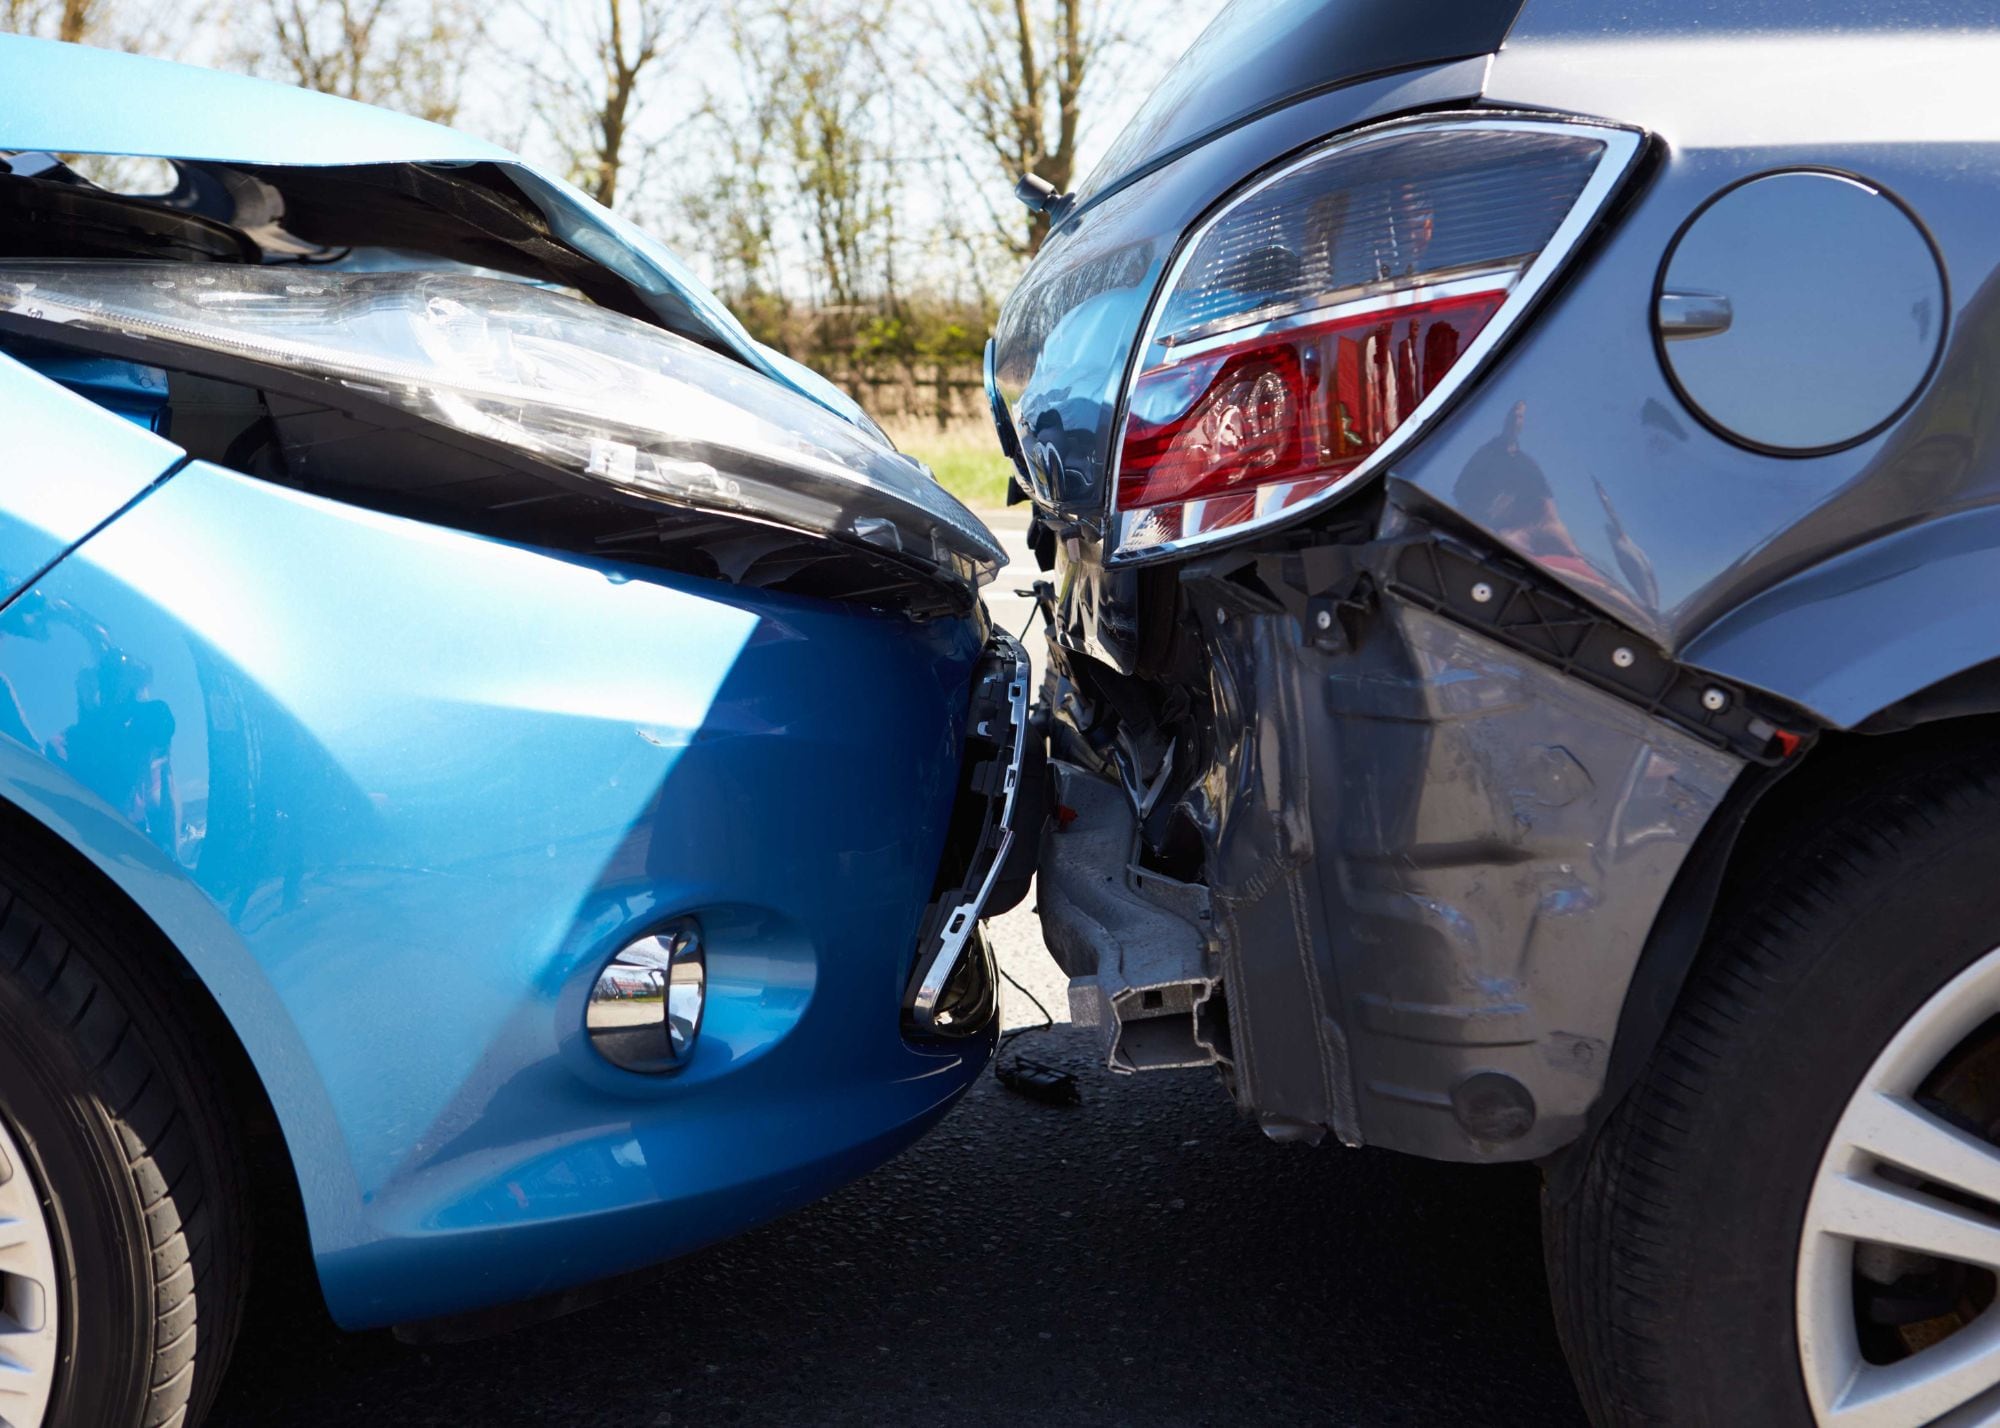 SR22 car accident insurance is required for high-risk drivers involved in an accident. It is commonly used in Nashville, TN to fulfill legal requirements and maintain driving privileges.